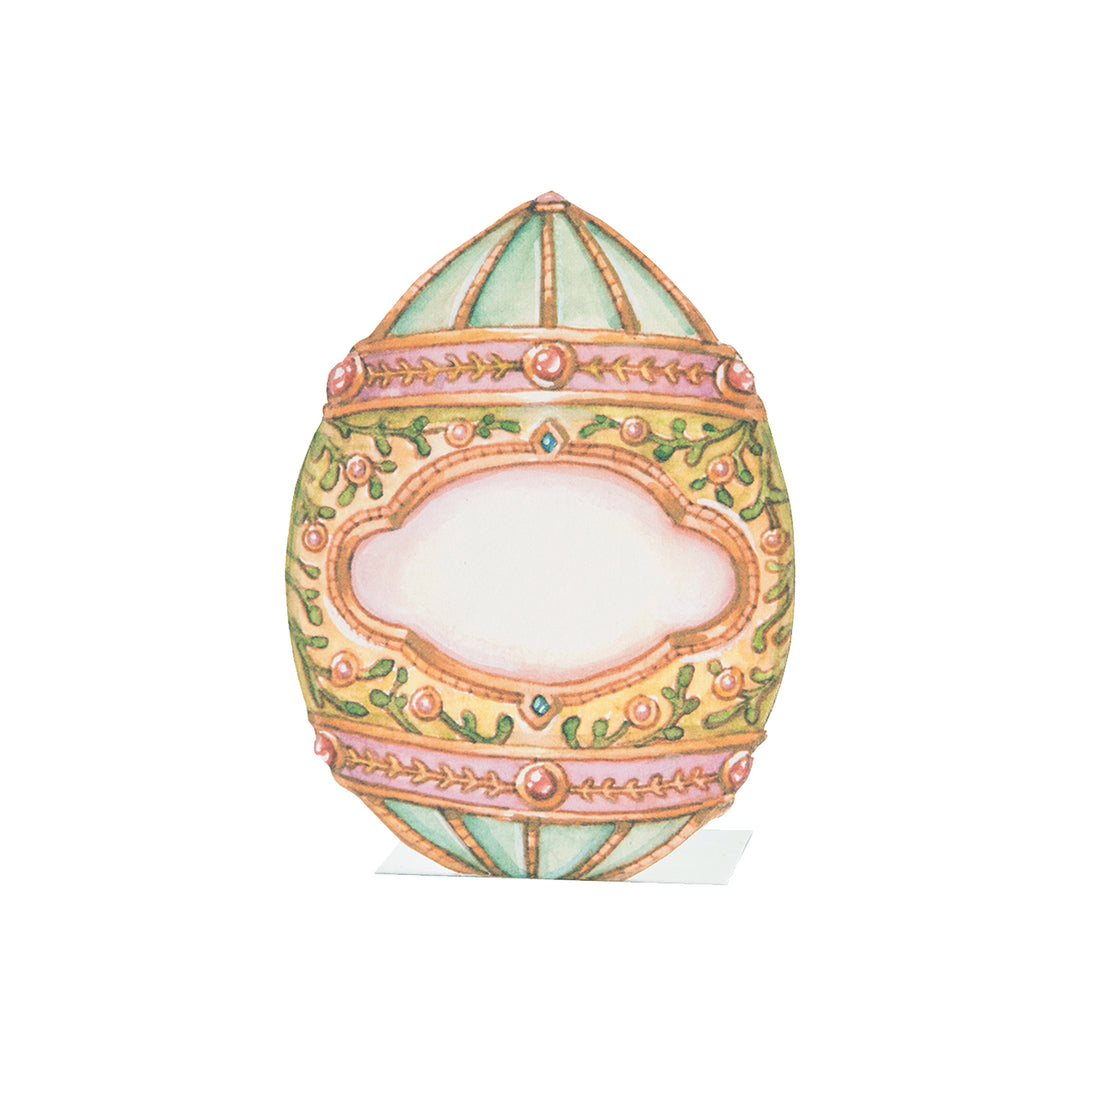 A die-cut freestanding place card featuring an elaborate Fabergé egg in teal, pink, green and gold with a gold-framed open area in the center for a personalizes message.